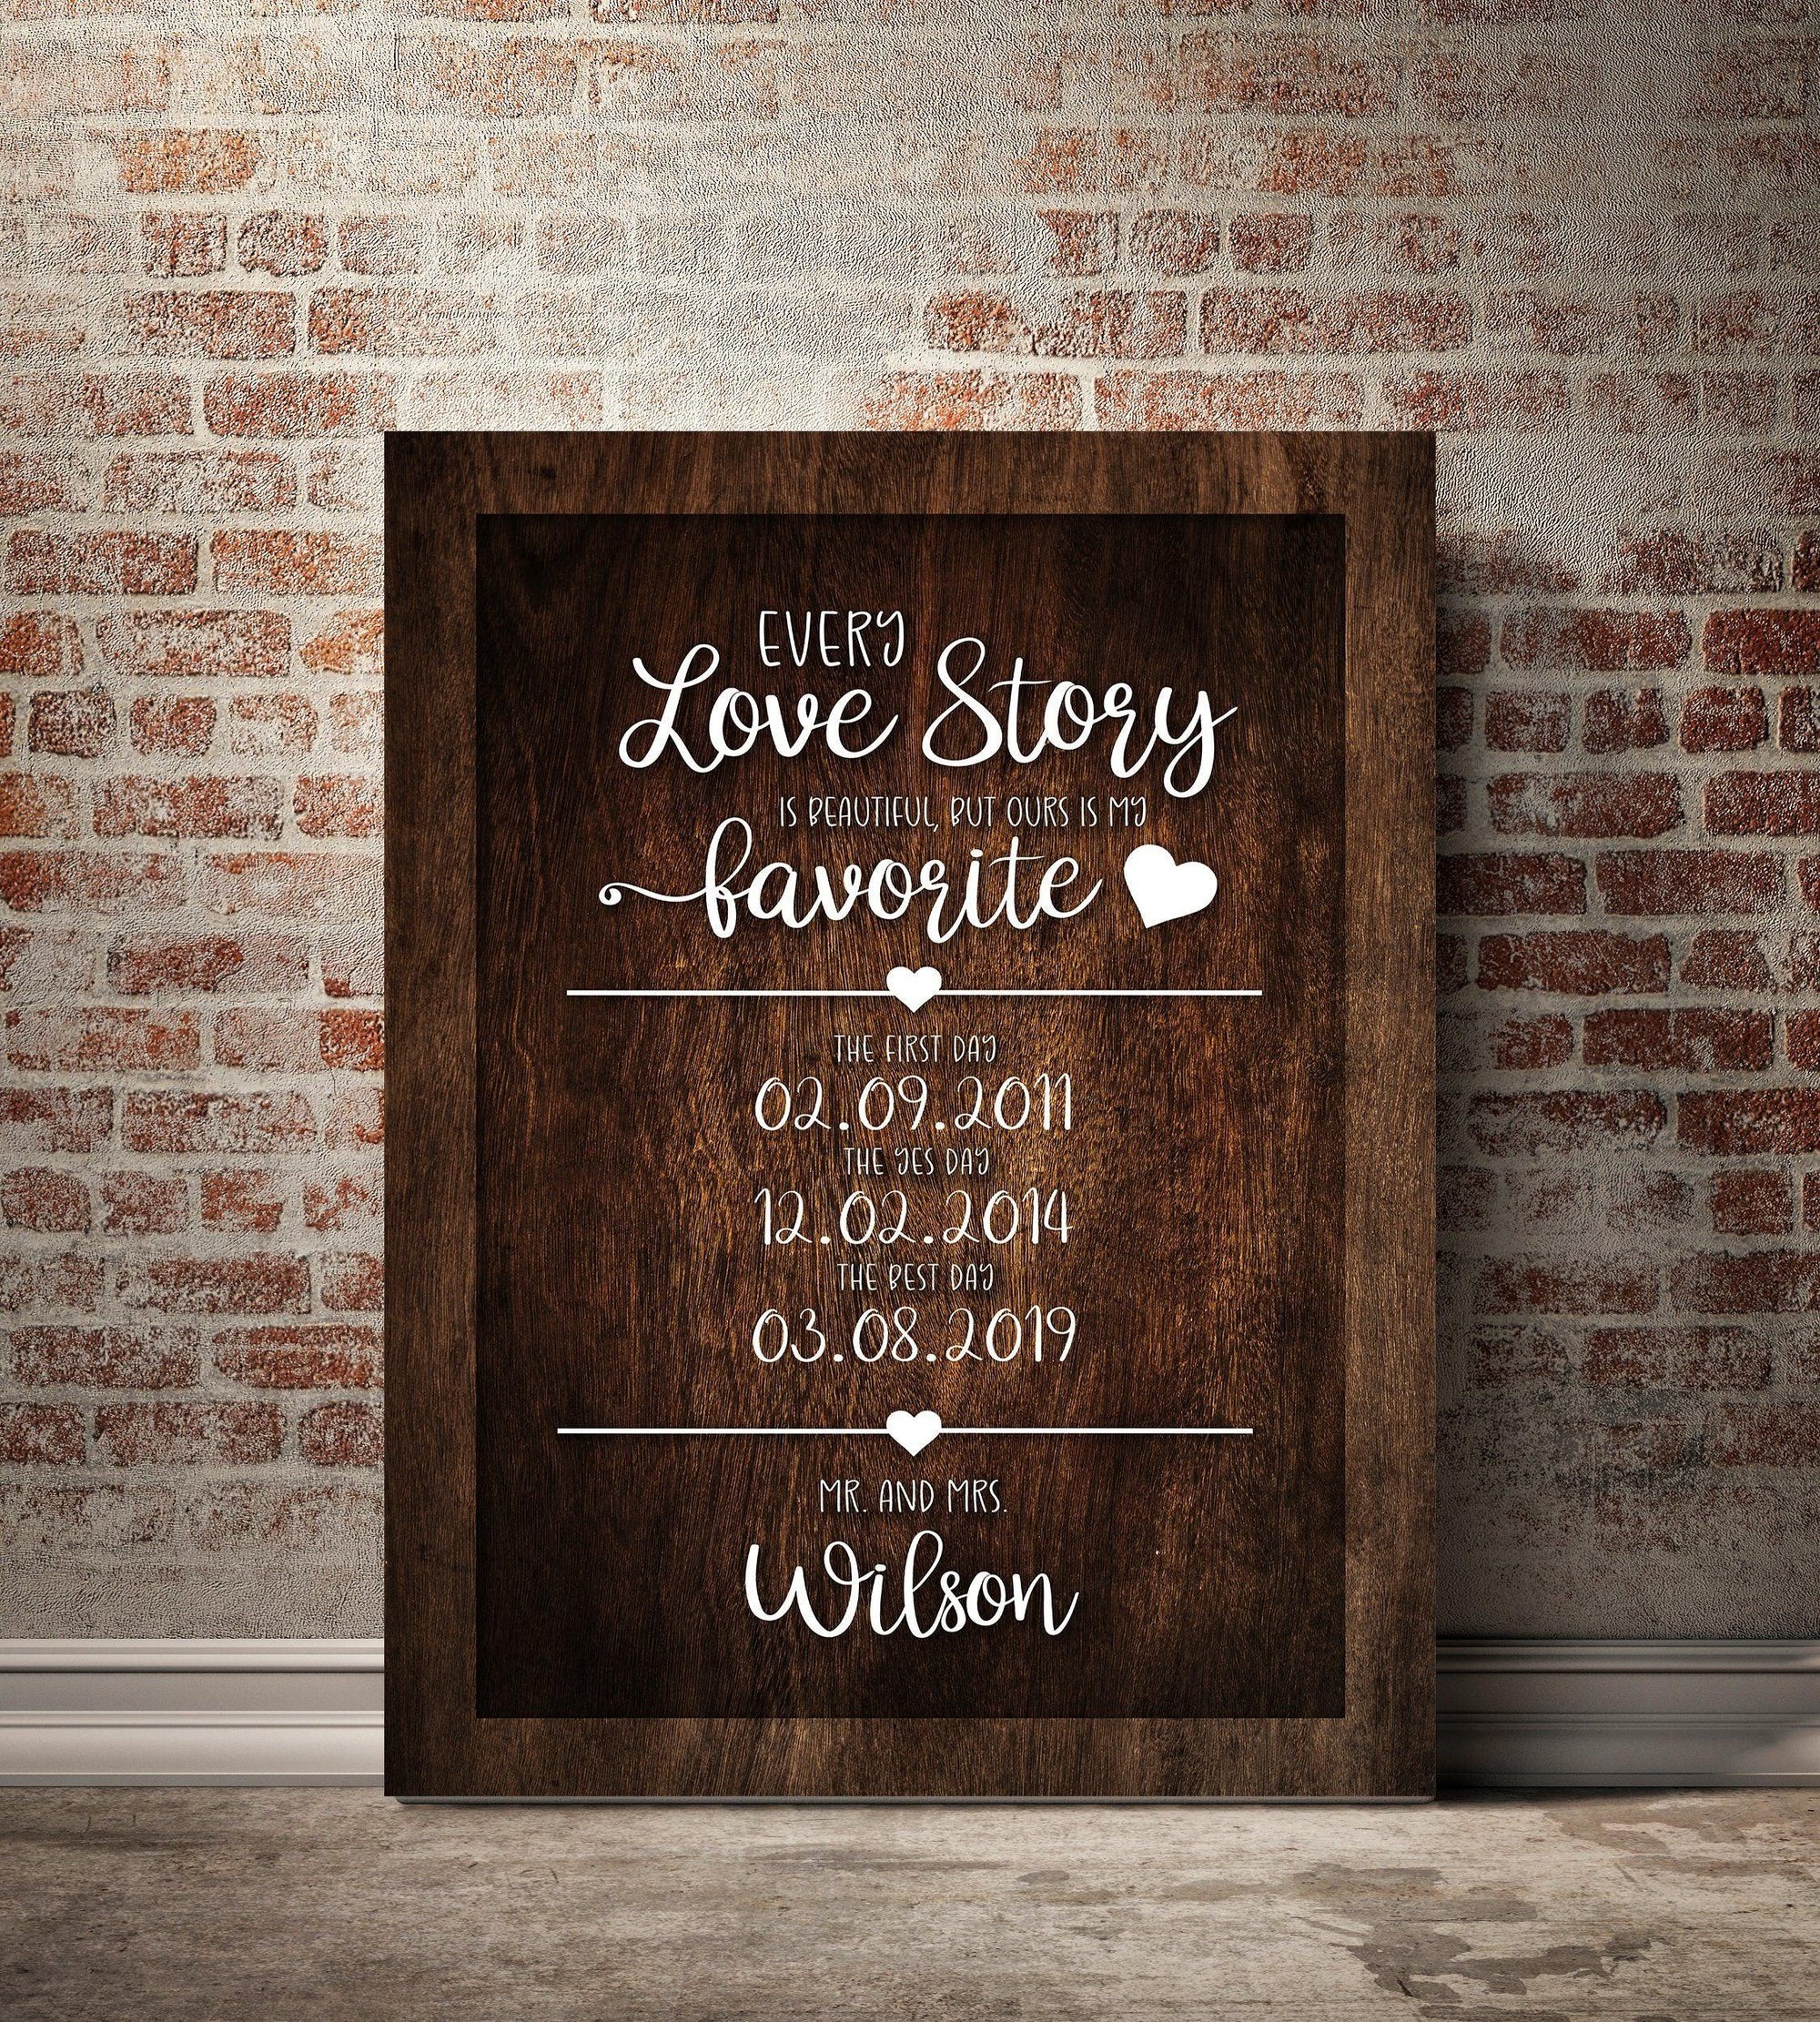 Every Love Story is beautiful, but ours is my favorite milestone first kiss first date wedding art. Wooden plaque design on 1 1/2 thick gallery quality canvas wall art. Includes last name. Hottest wedding gift for 2021. Unique wedding present for same-sex couples.